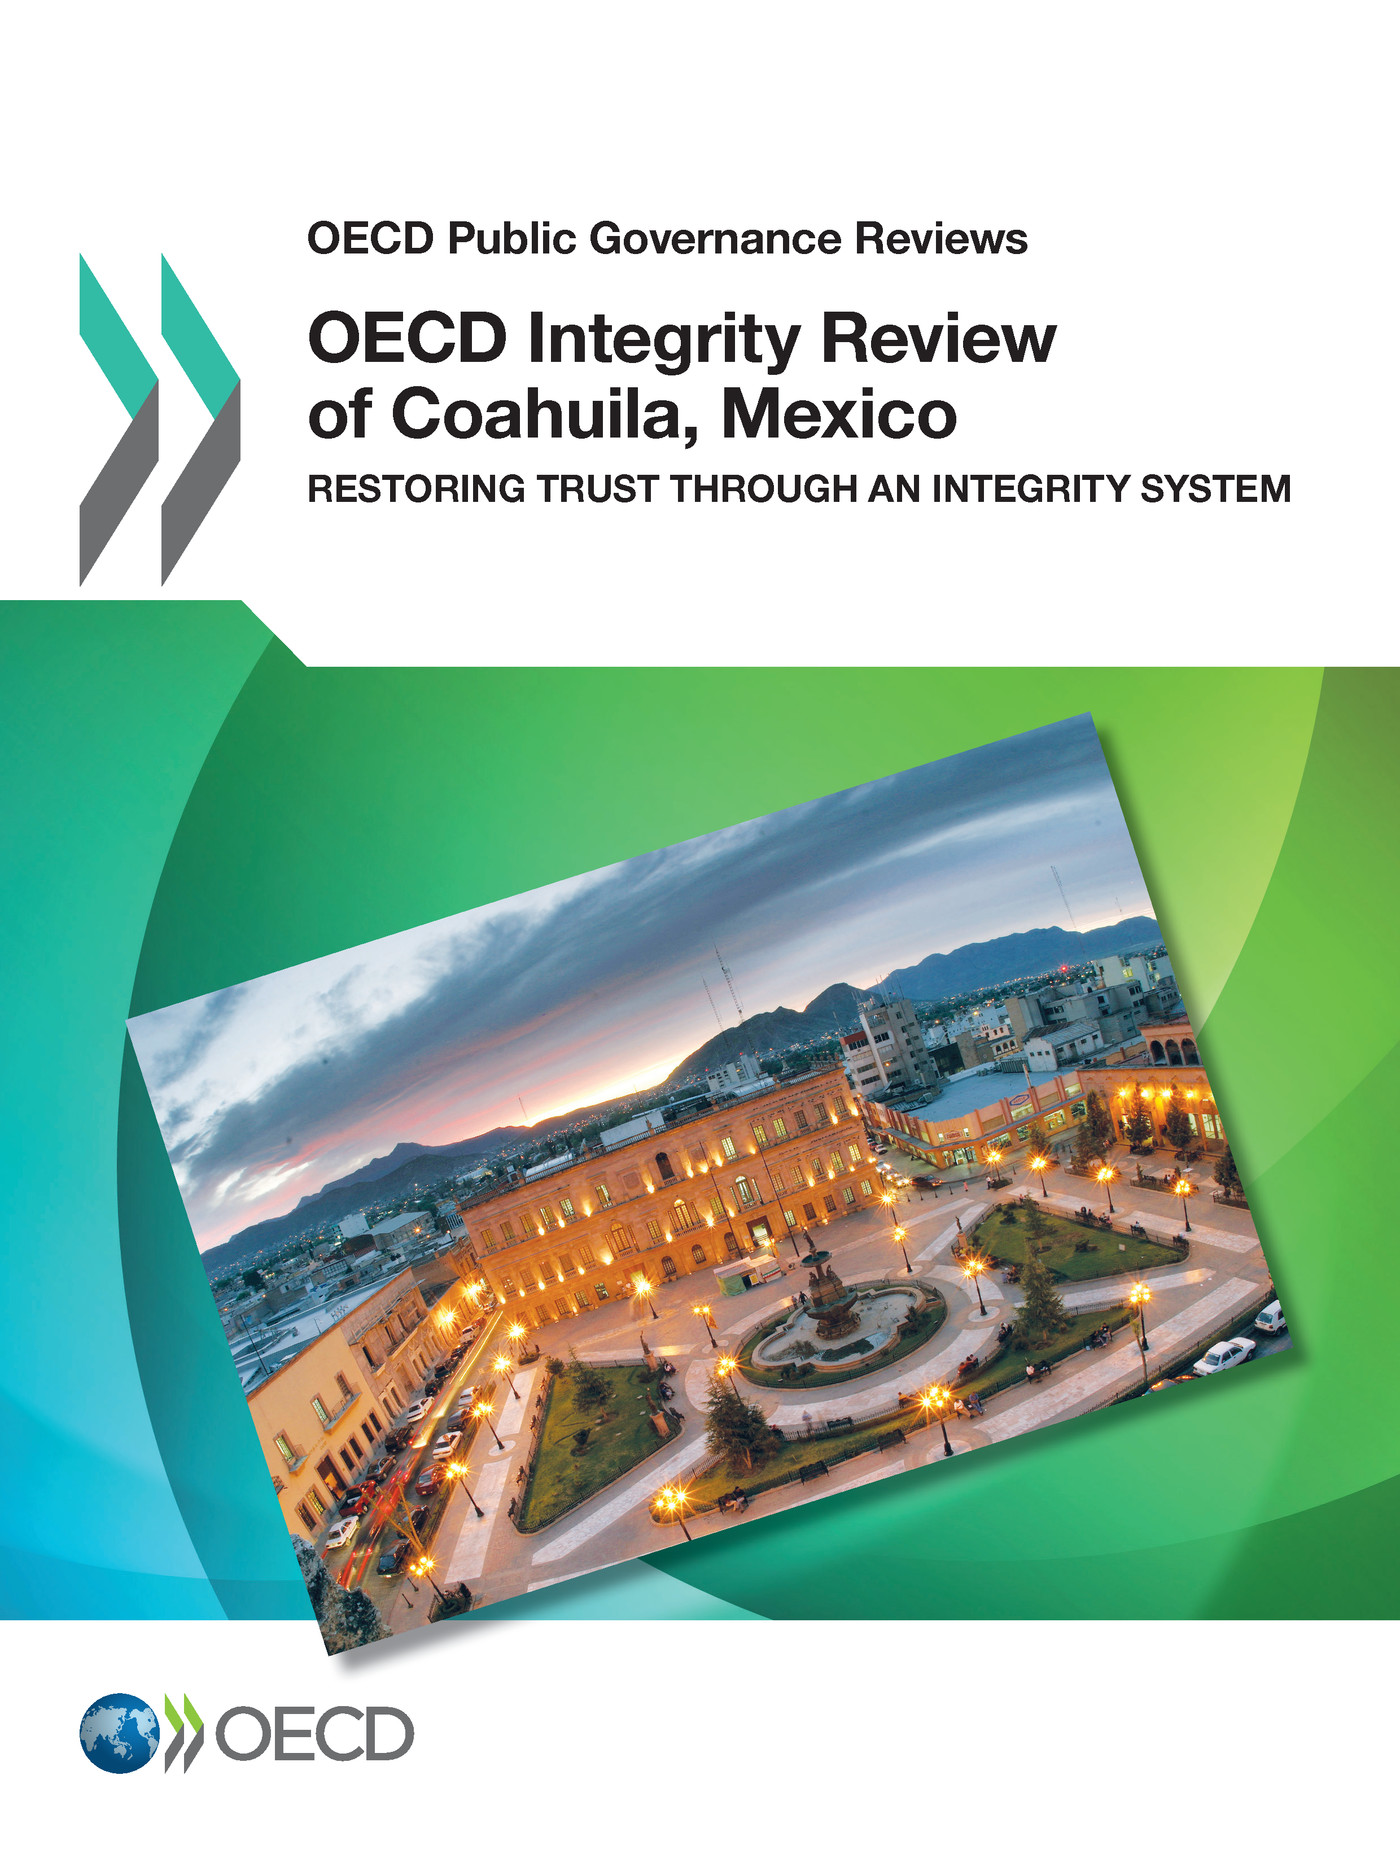 OECD Integrity Review of Coahuila, Mexico -  Collectif - OCDE / OECD